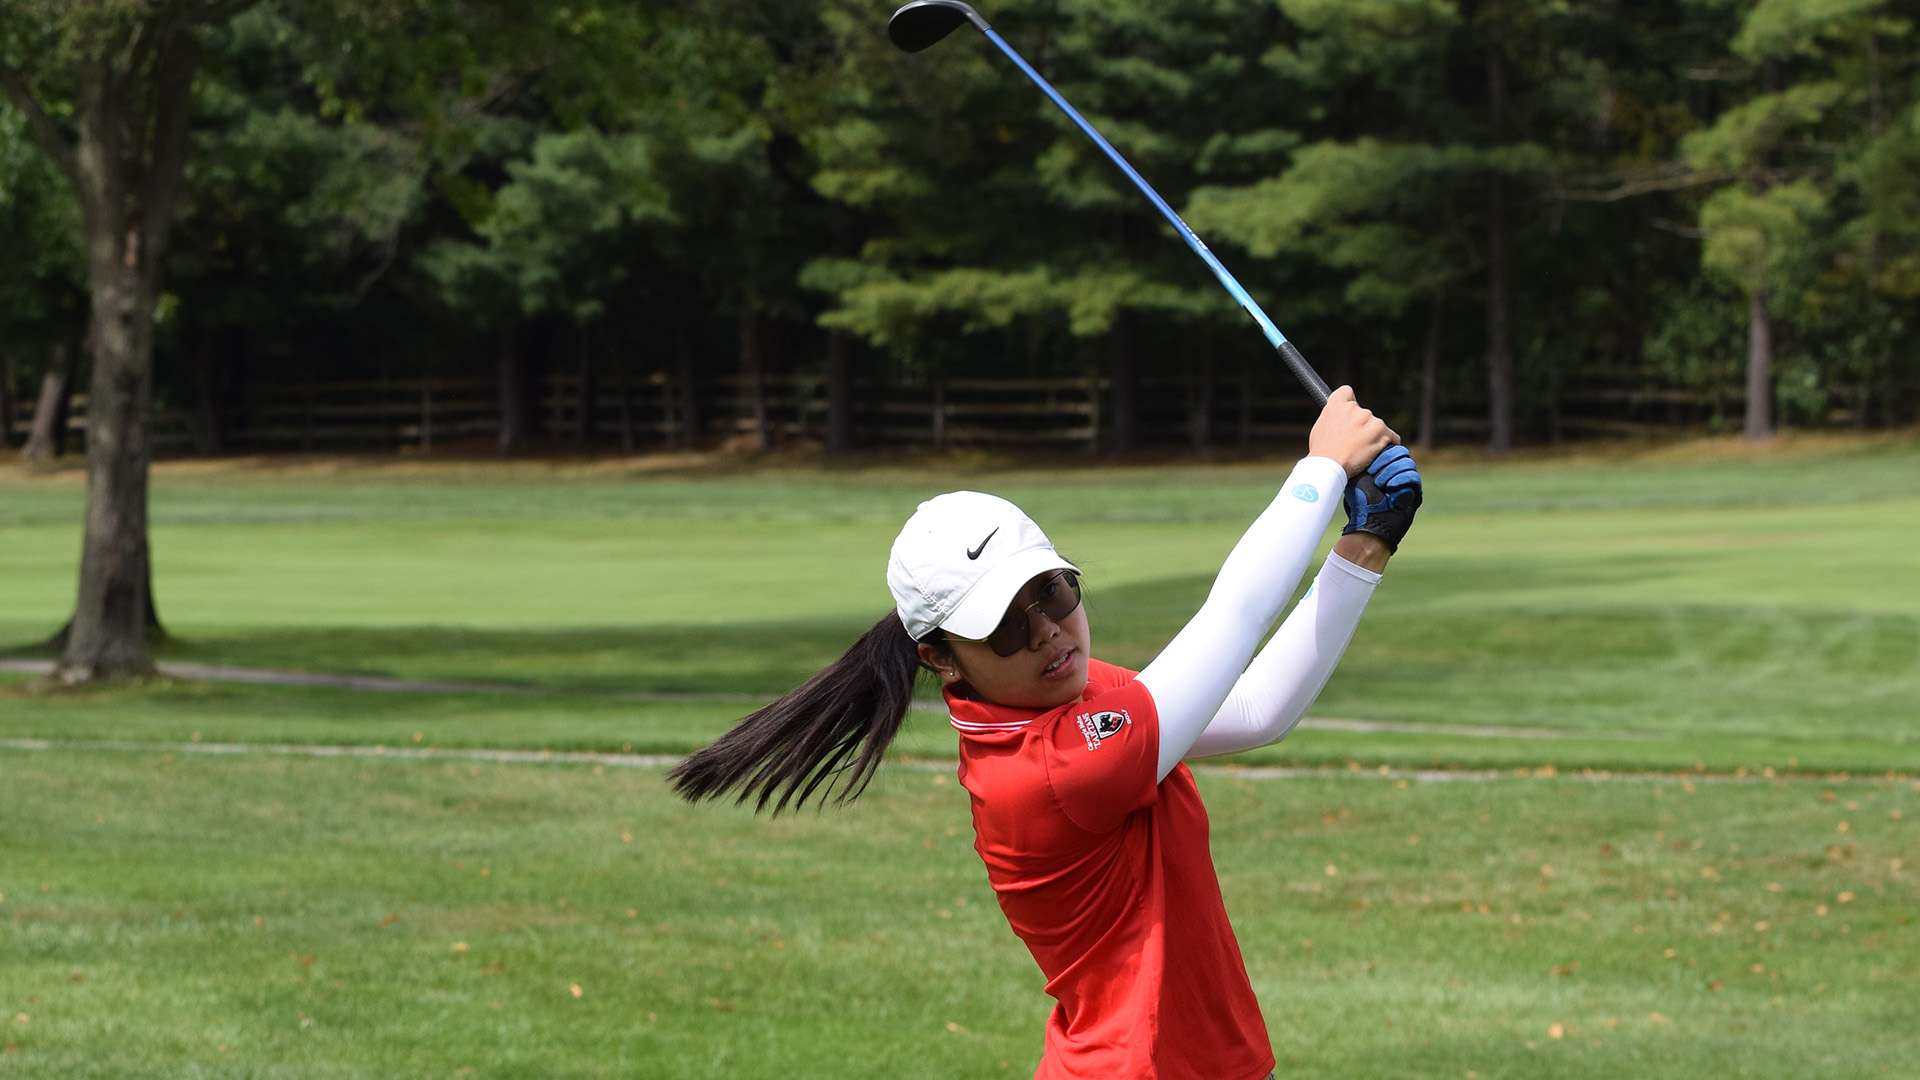 Tartans Open Play at Montgomery Country Club Women's Intercollegiate